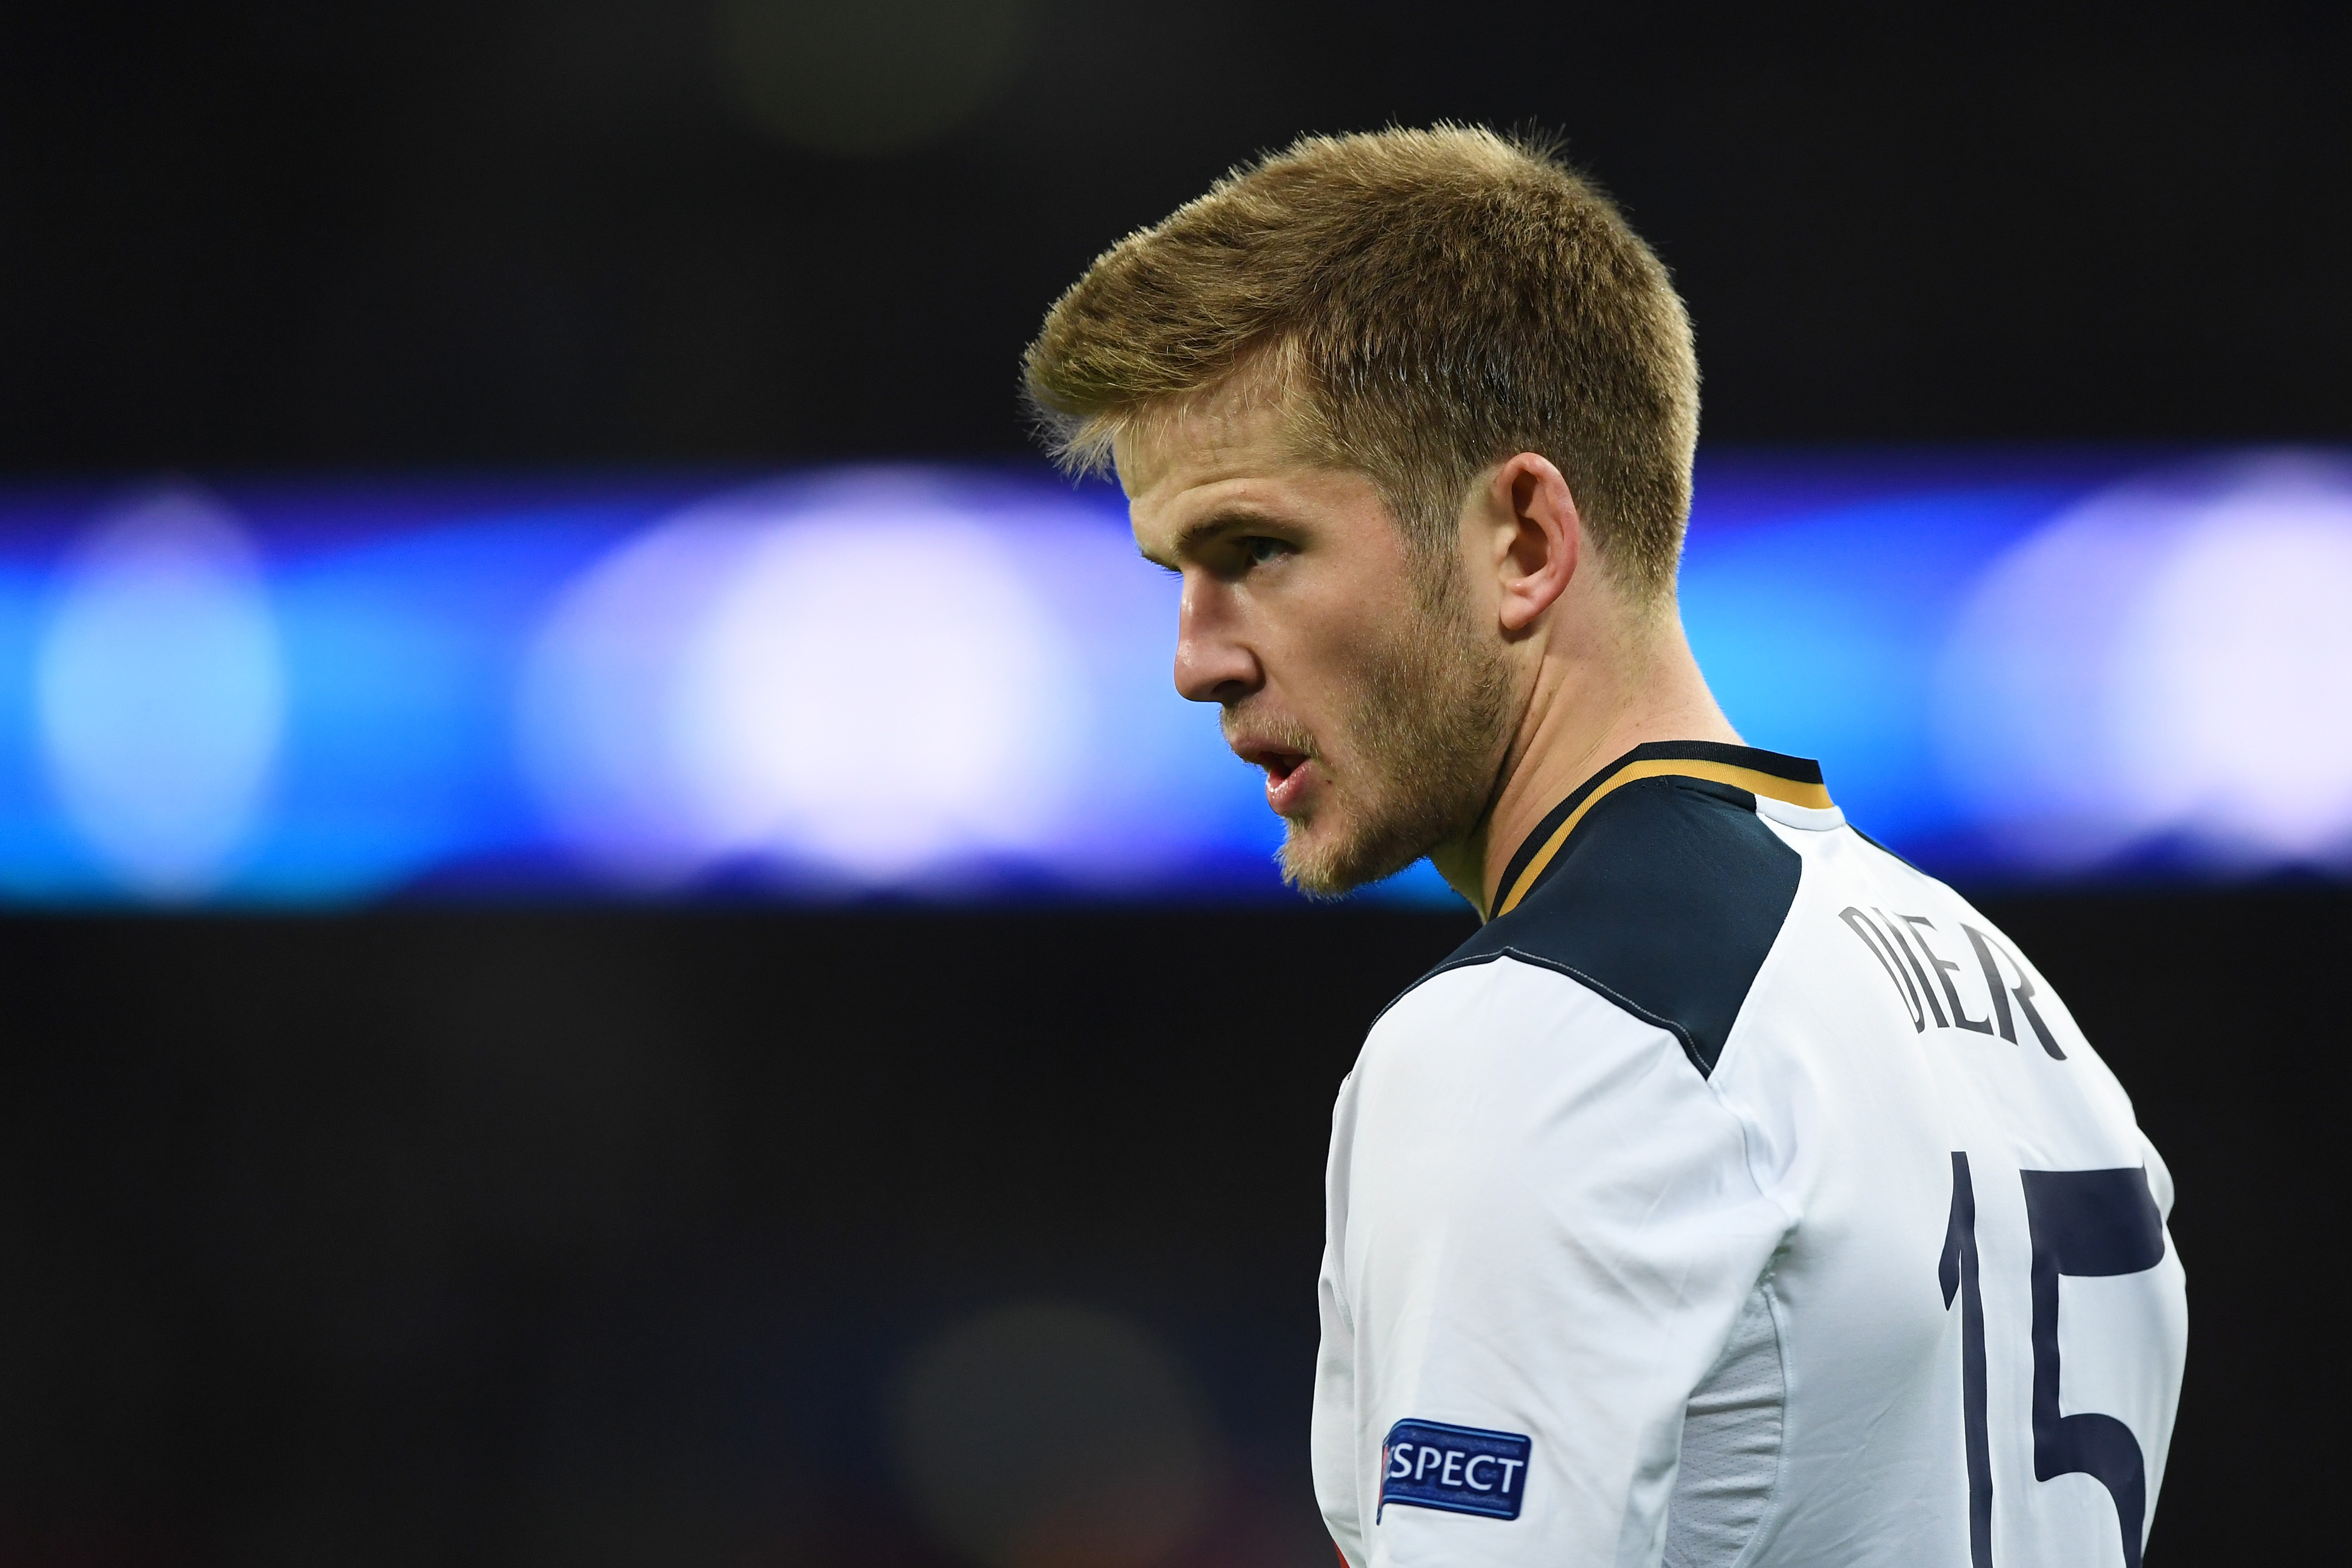 LONDON, ENGLAND - NOVEMBER 02: Eric Dier of Tottenham Hotspur looks on during the UEFA Champions League Group E match between Tottenham Hotspur FC and Bayer 04 Leverkusen at Wembley Stadium on November 2, 2016 in London, England.  (Photo by Shaun Botterill/Getty Images)